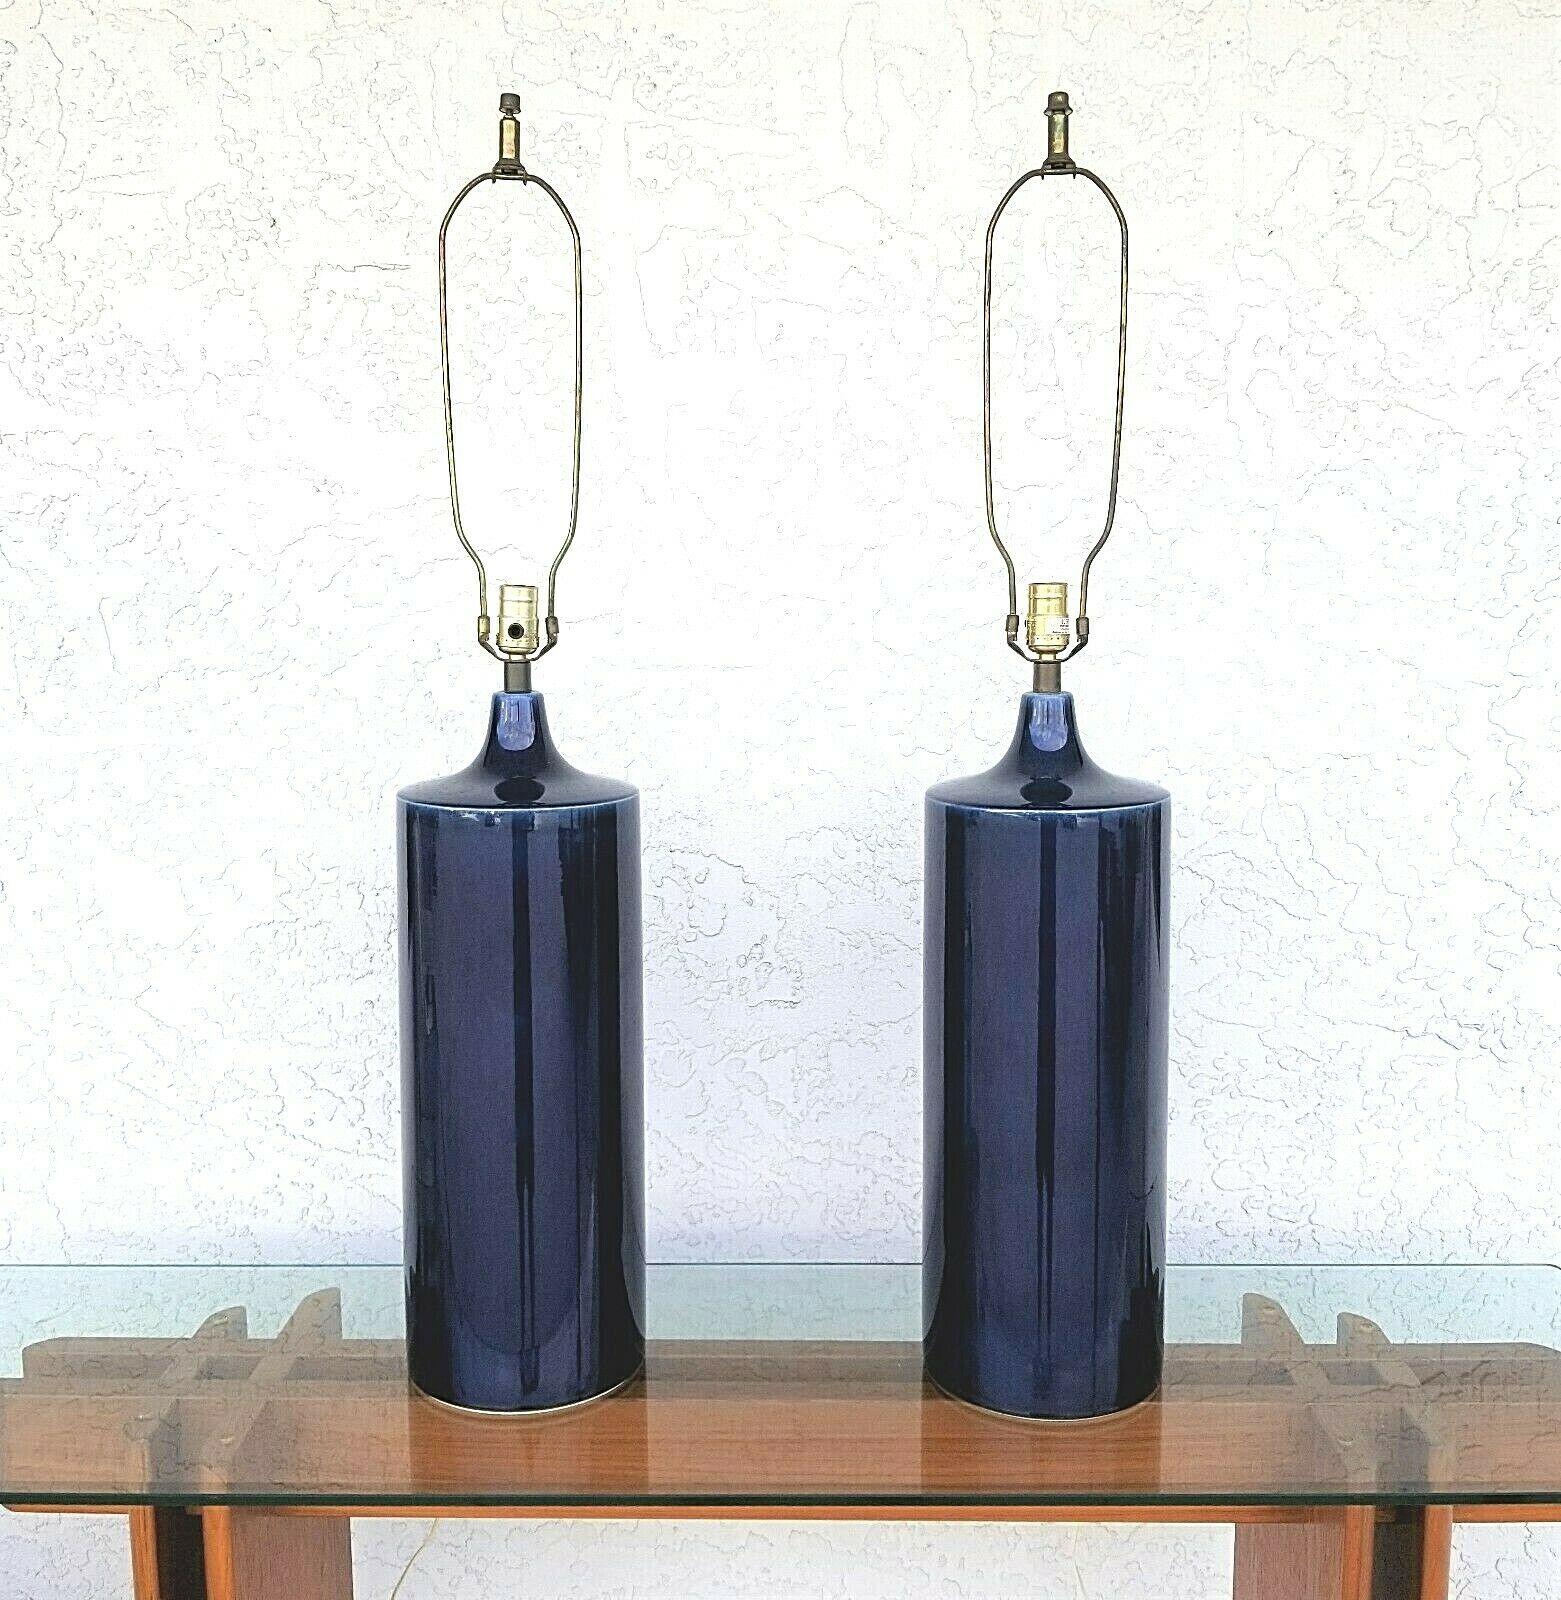 Offering one of our recent Palm Beach Estate fine lighting acquisitions of a
rare pair of large lotte and gunnar bostlund cobalt blue cylindrical ceramic table lamps with the original fiberglass shades, and retractable cords

Measurements
39